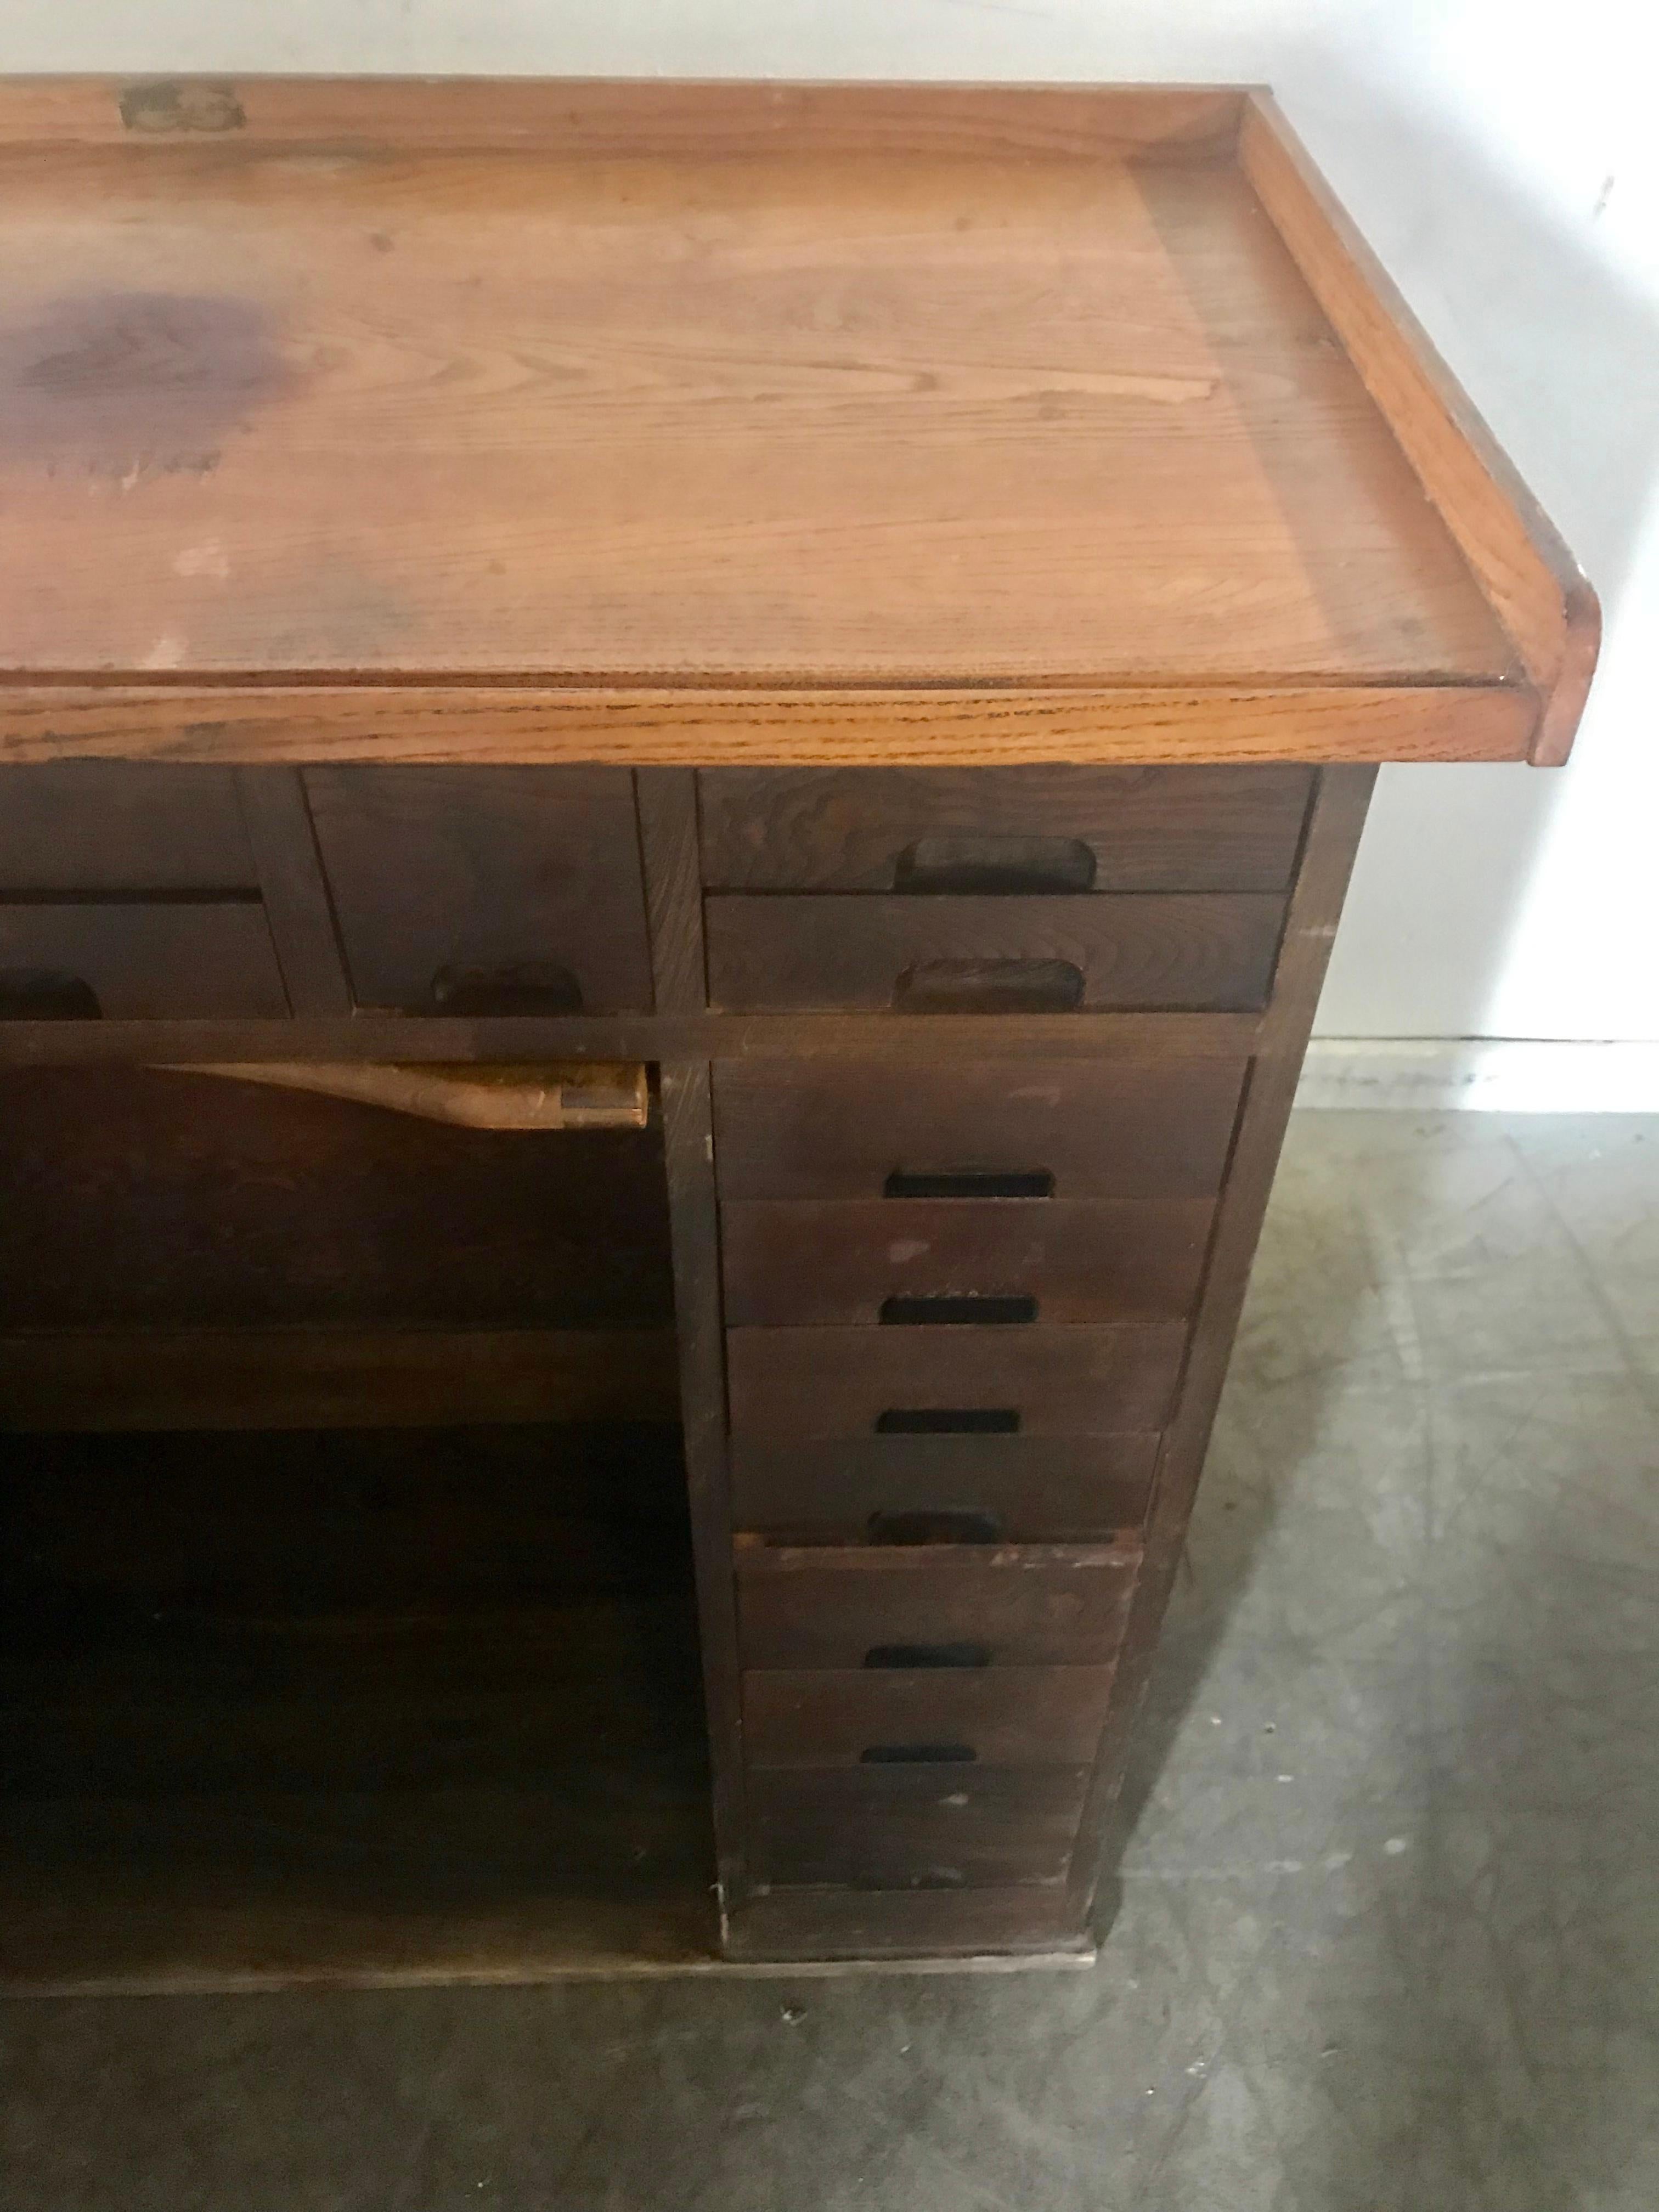 Early 20th Century Antique Oak Multi-Drawer Jewelers Desk, Watchmakers Work Bench J.H. Rosberg